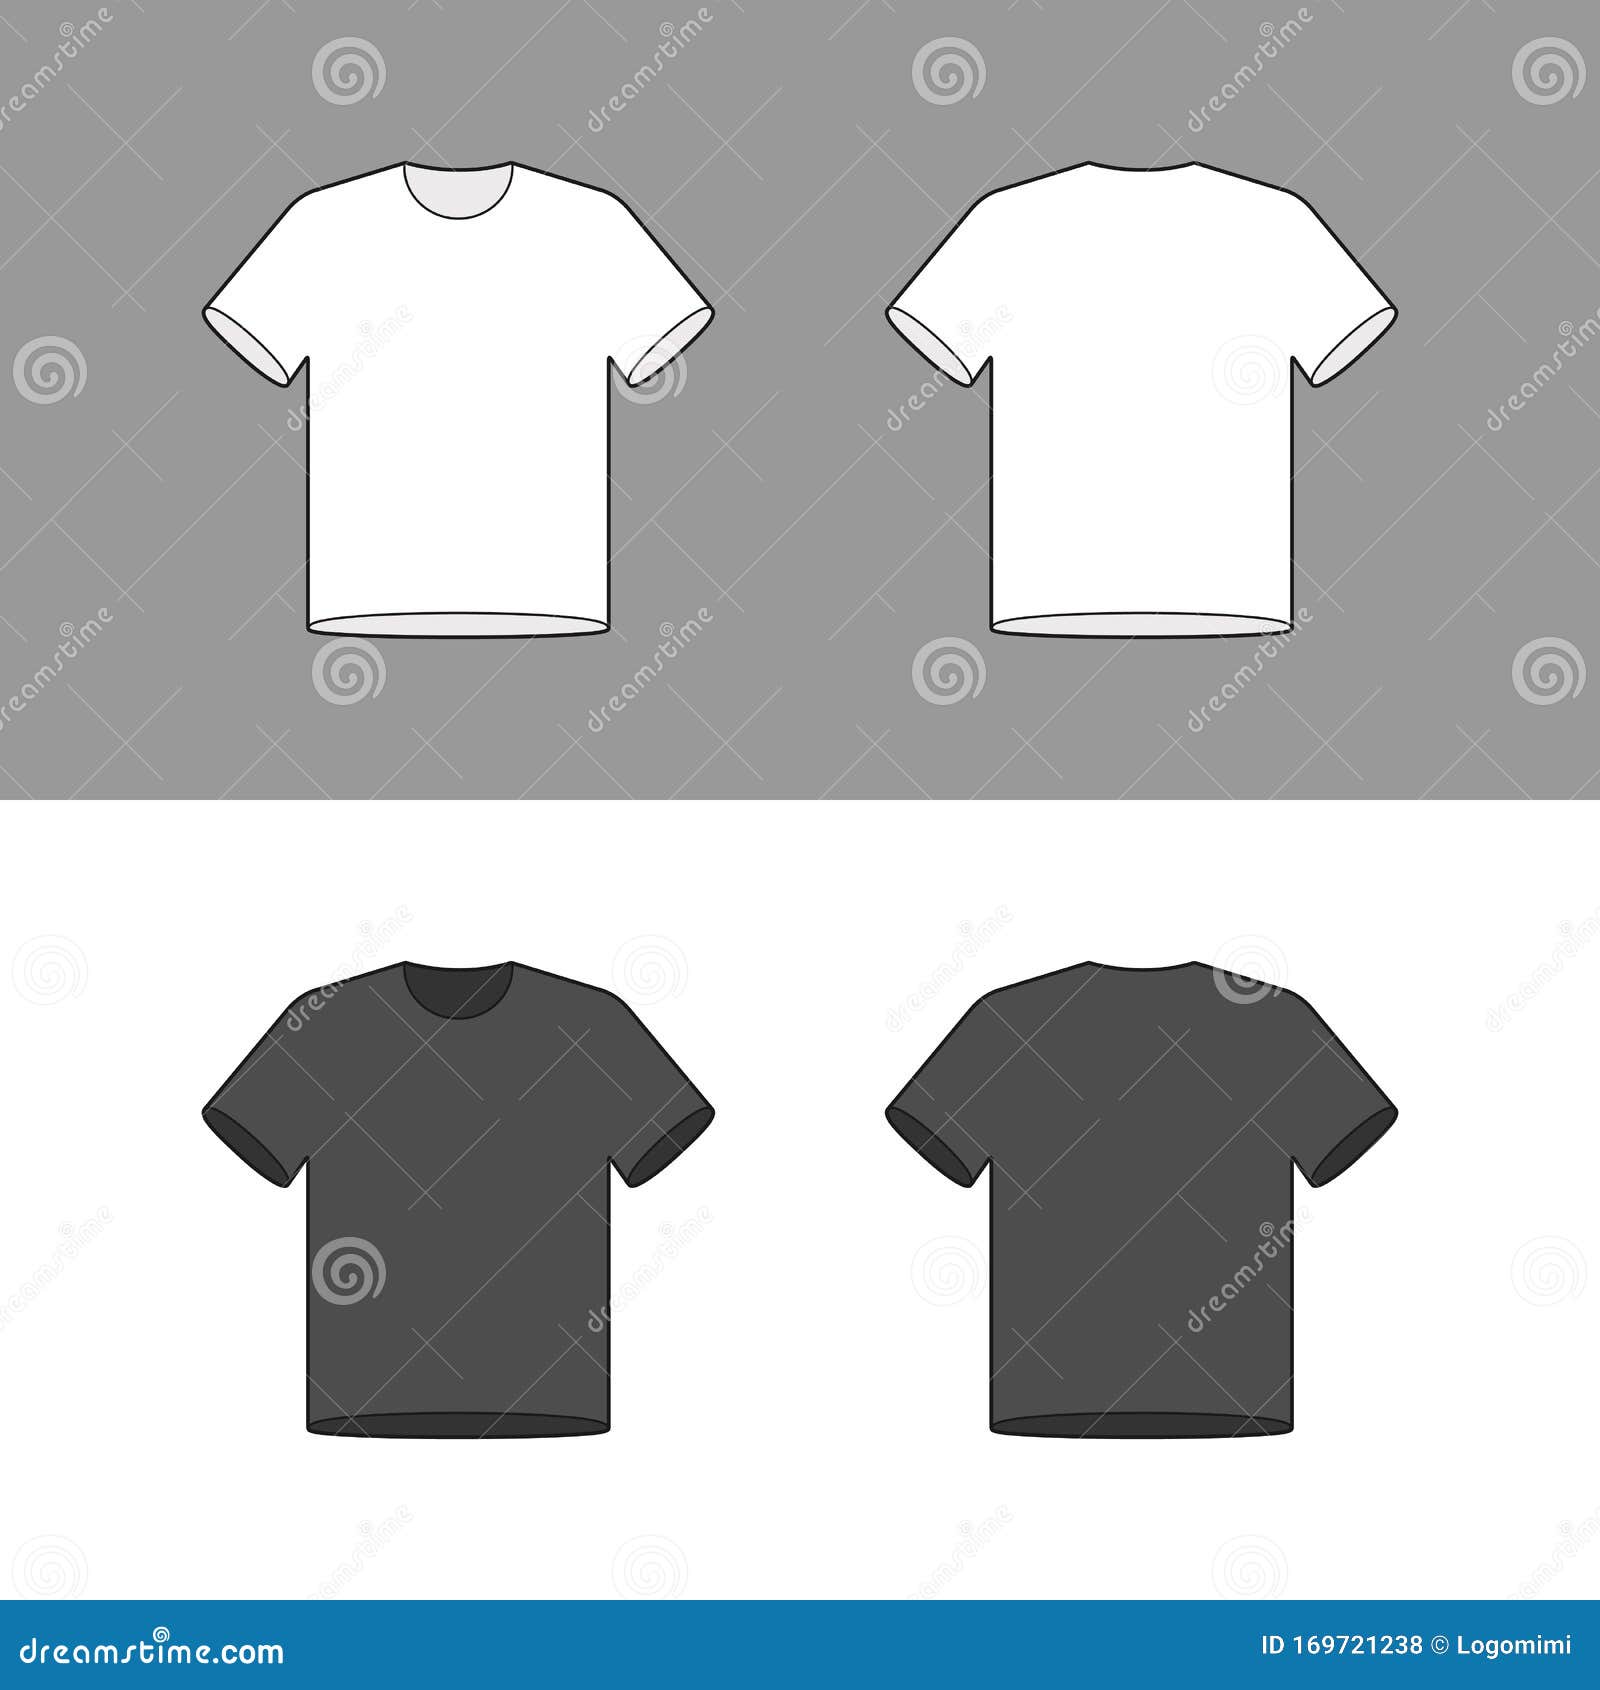 Black and White Shirt Mock Up Set, Blank T-shirt Template Design, Front ...